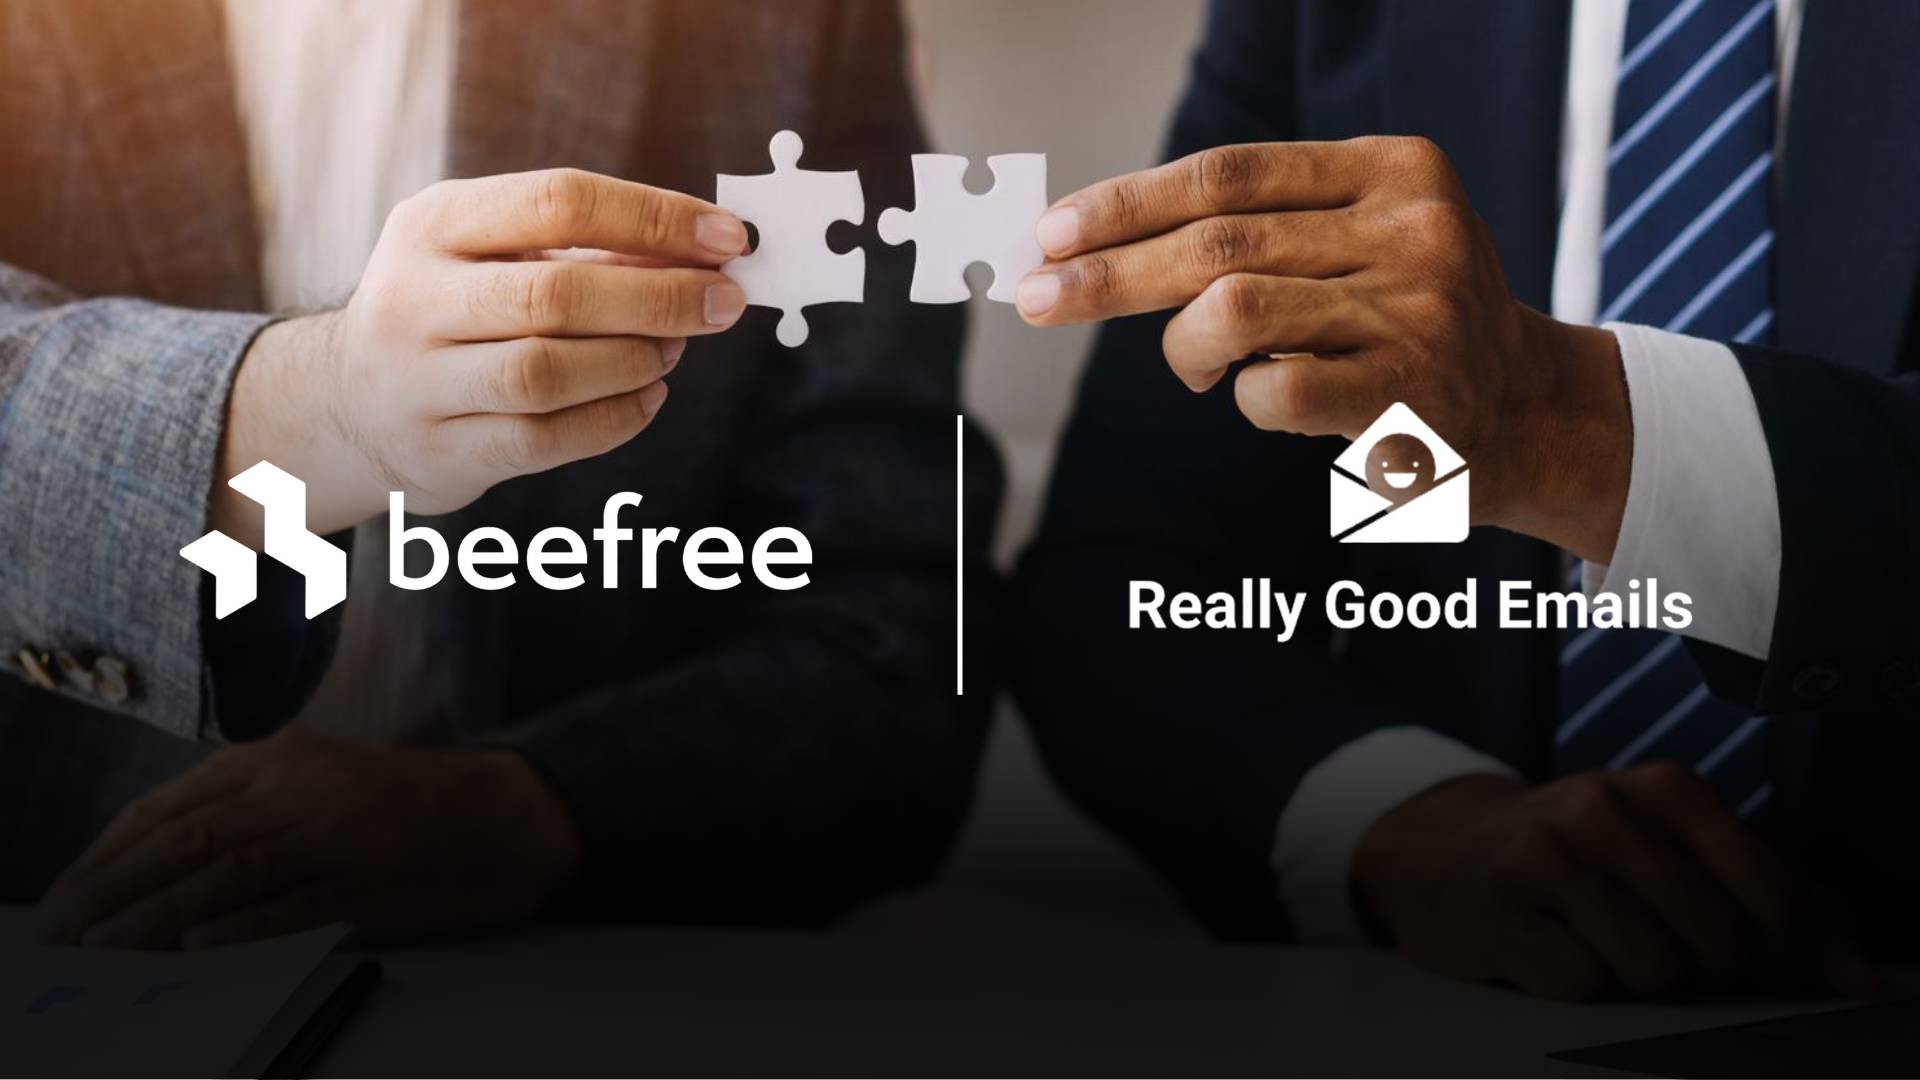 Beefree Elevates Email Creation with Really Good Emails Acquisition